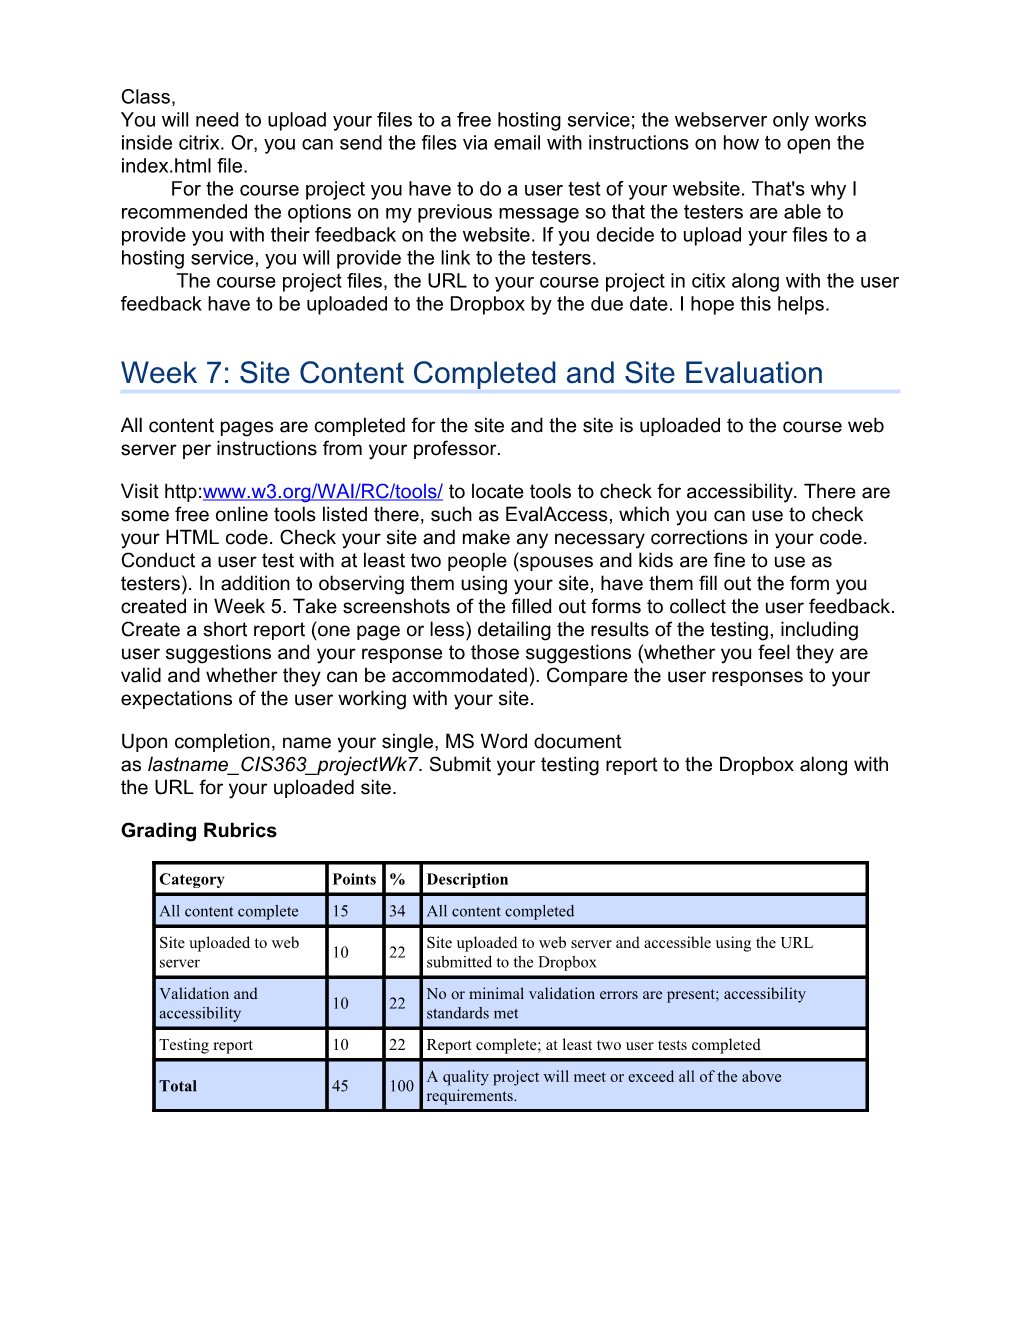 Week 7: Site Content Completed and Site Evaluation